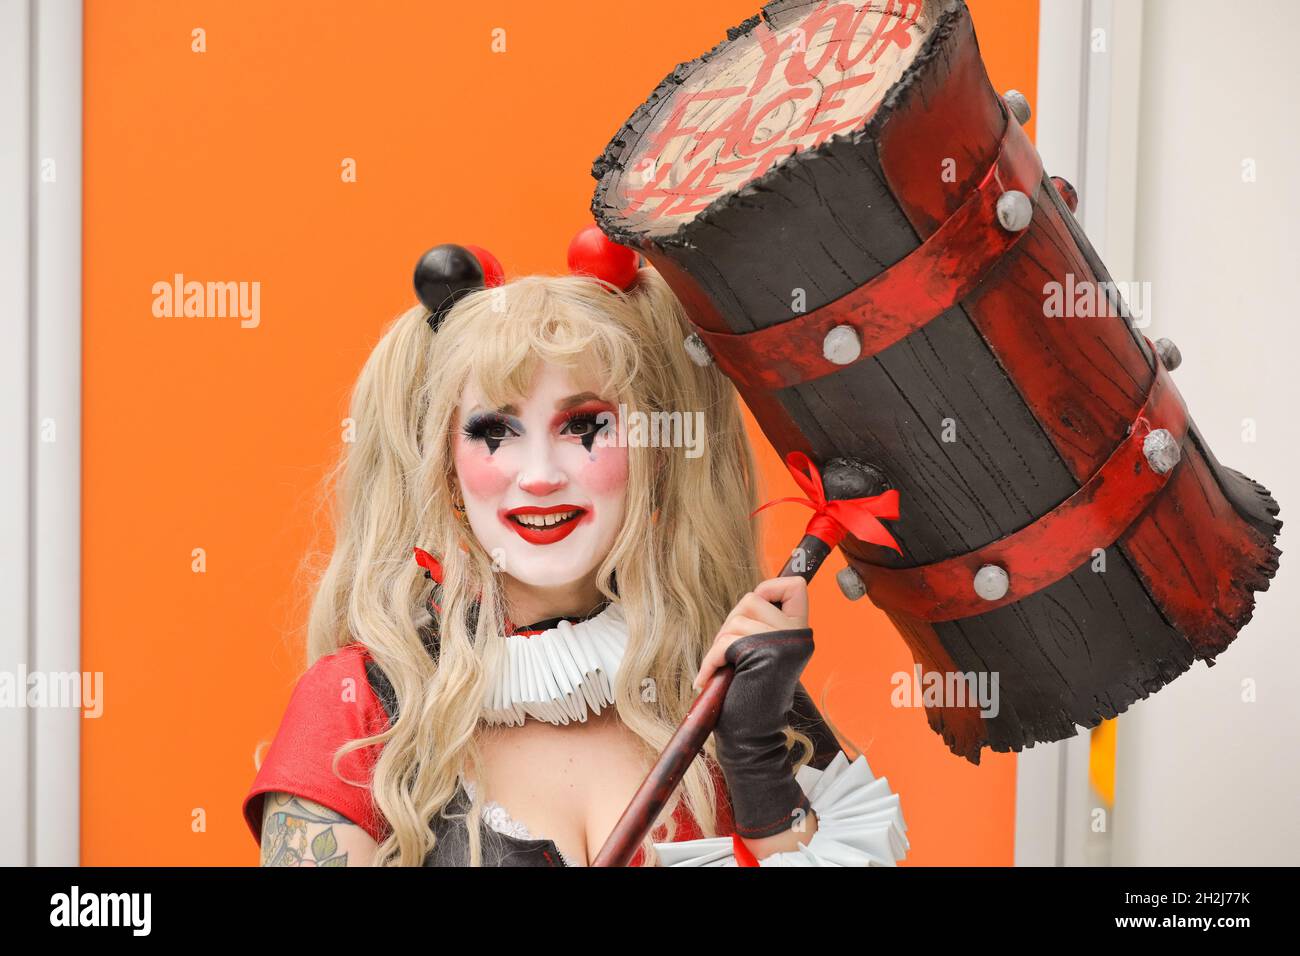 ExCel, London, UK. 22nd Oct, 2021. A cosplayer has fun posing as Harley Quinn, a character by DC Comics. Cosplayers, fans and visitors once again descend on the ExCel London exhibition centre for MCM Comic Con. MCM London Comic Con returns 22-24 October for a celebration of Pop Culture. Credit: Imageplotter/Alamy Live News Stock Photo